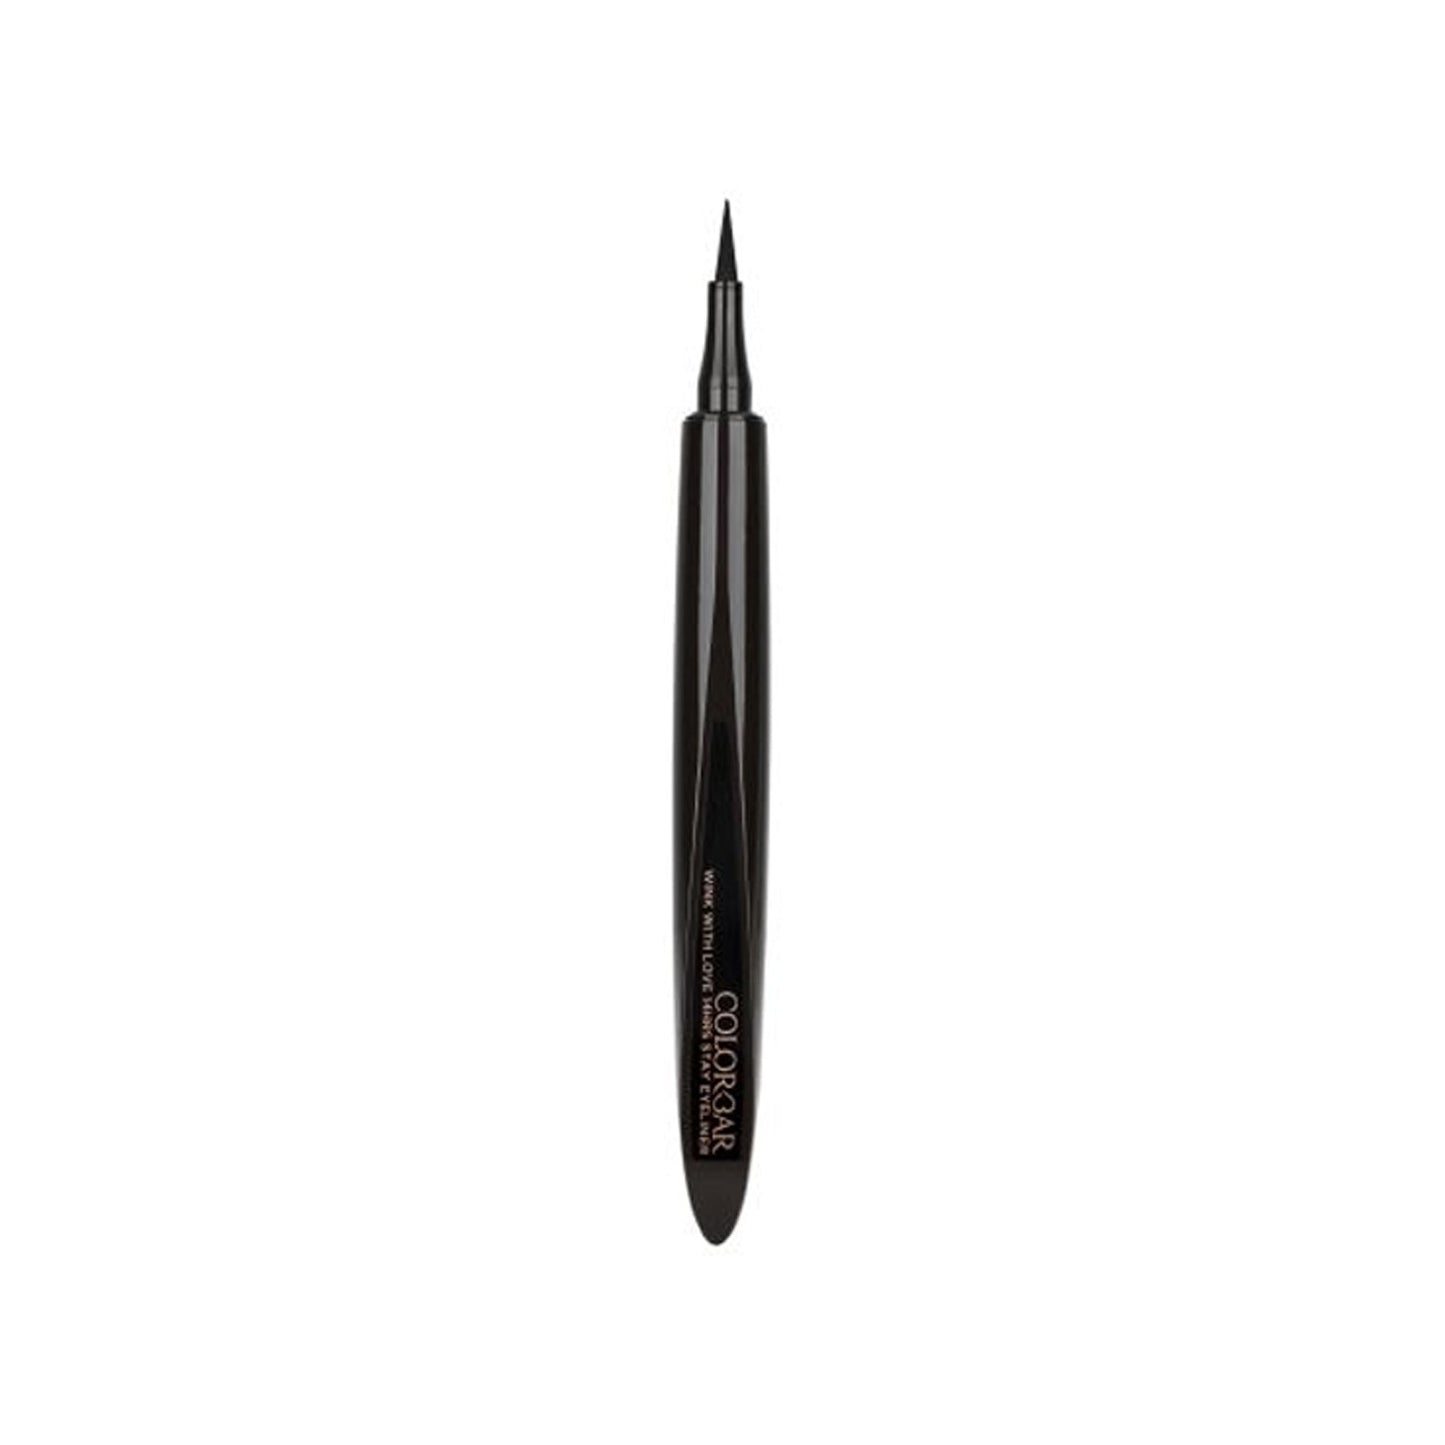 Colorbar Wink With Love 14Hrs Stay Eyeliner Black Charm - buy in USA, Australia, Canada